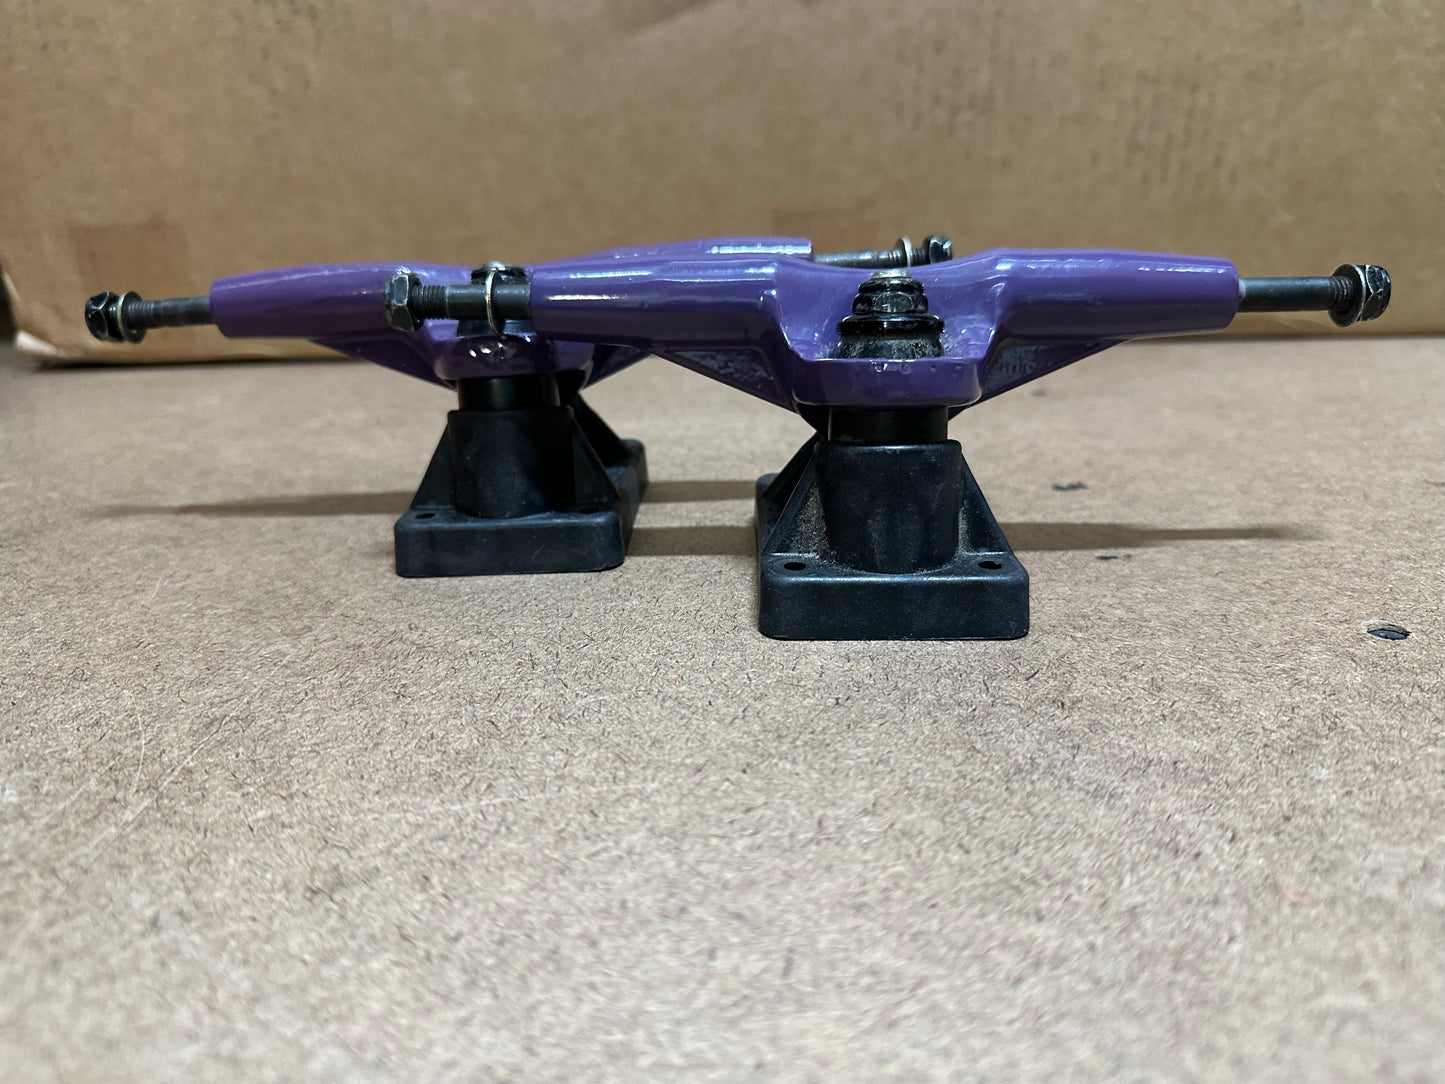 GullWing Super Pro III Trucks - USED - Black Base and Purple Dipped- AS IS - No Returns.